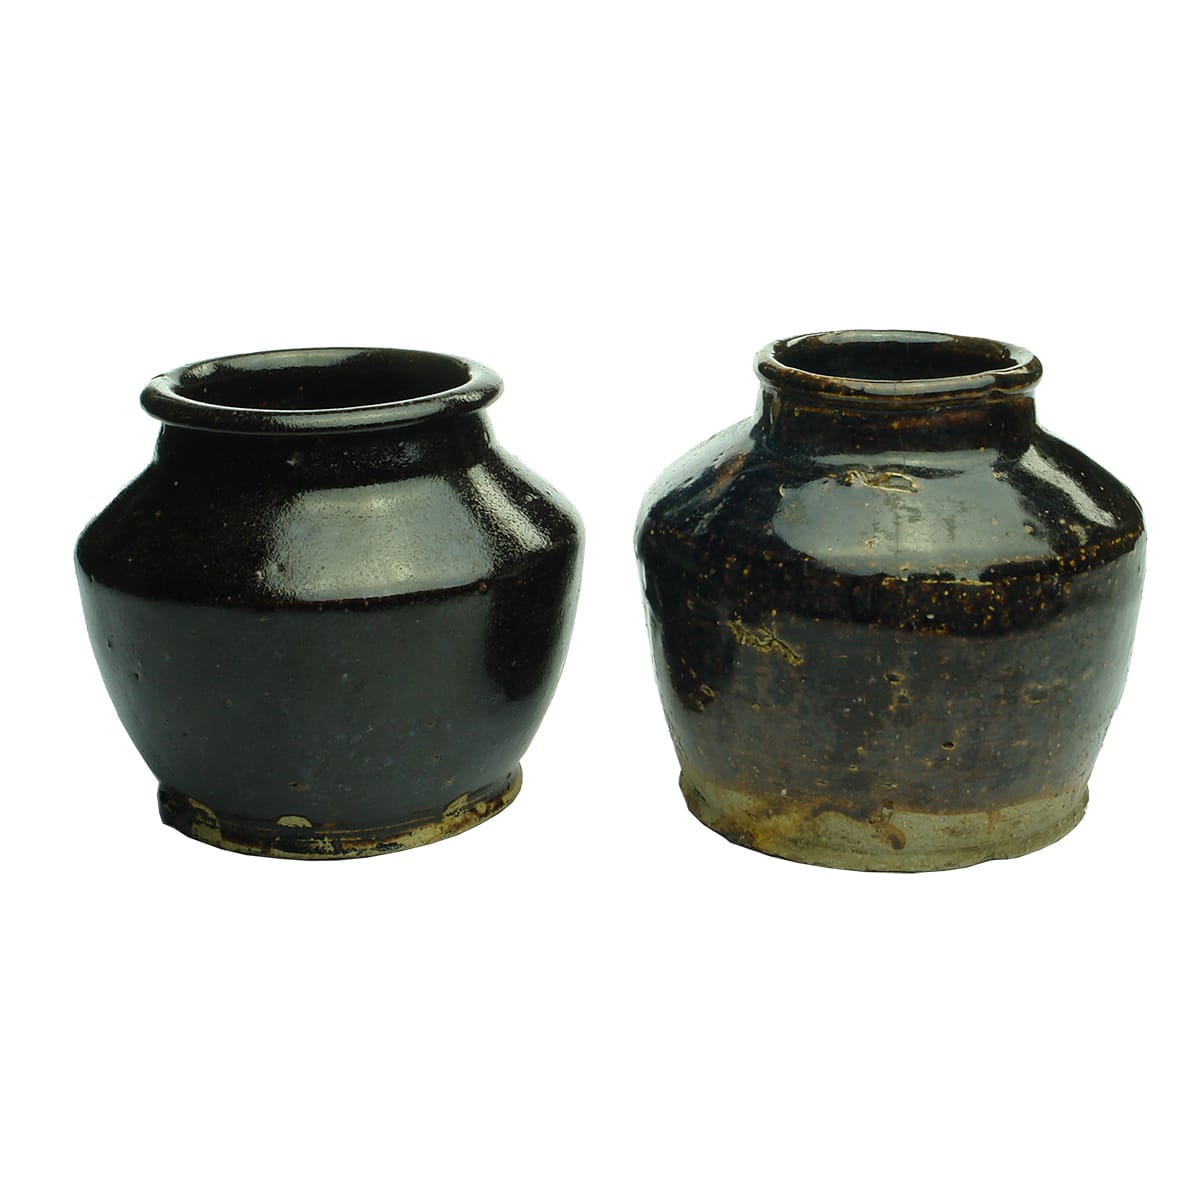 2 smaller brown glaze Chinese Bean Jars. Wide mouth jars.